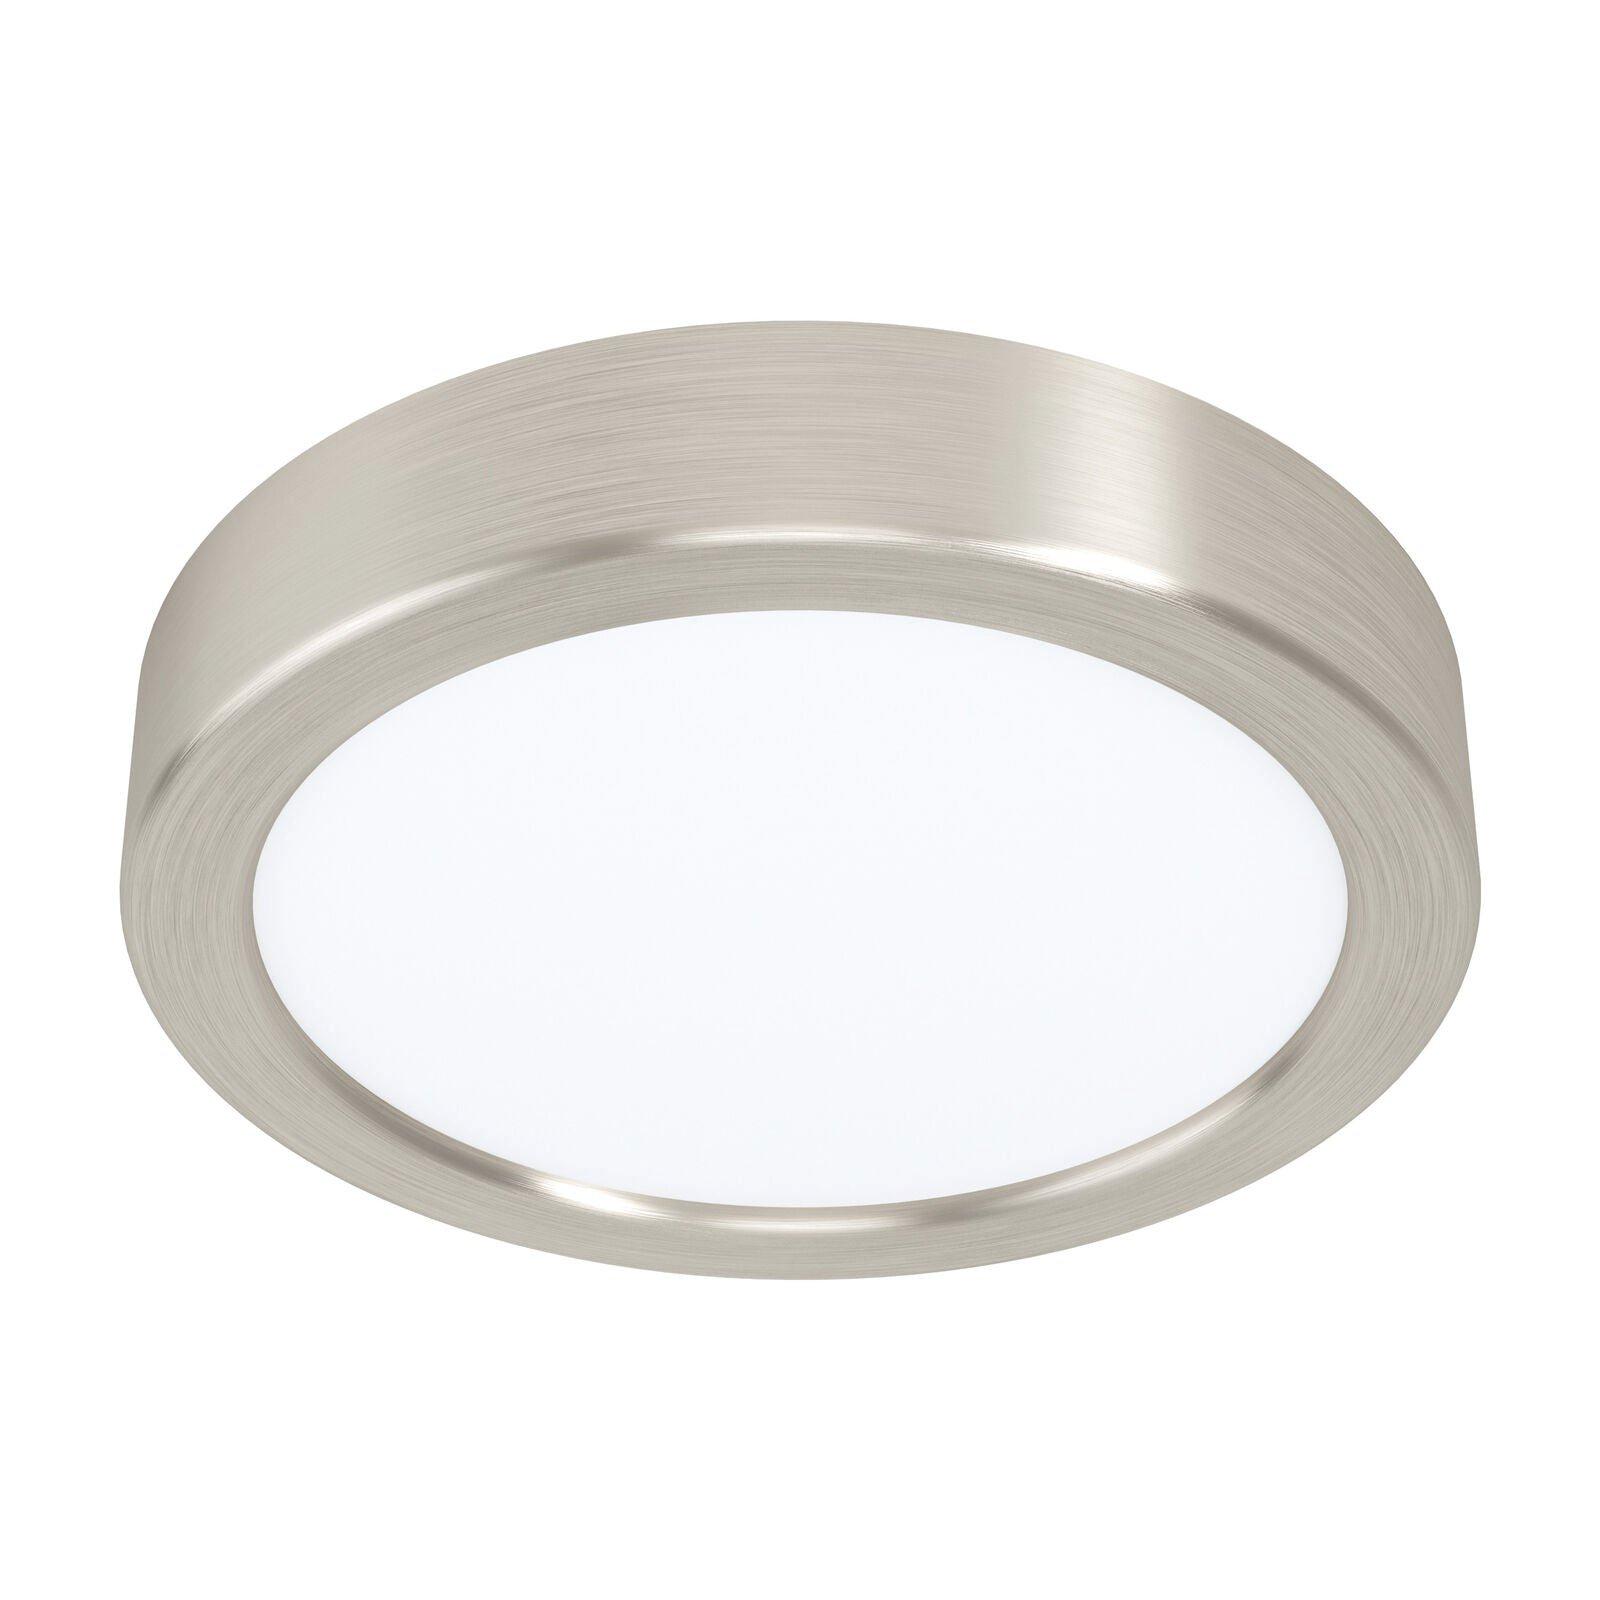 Wall / Ceiling Light Satin Nickel 160mm Round Surface Mounted 10.5W LED 3000K